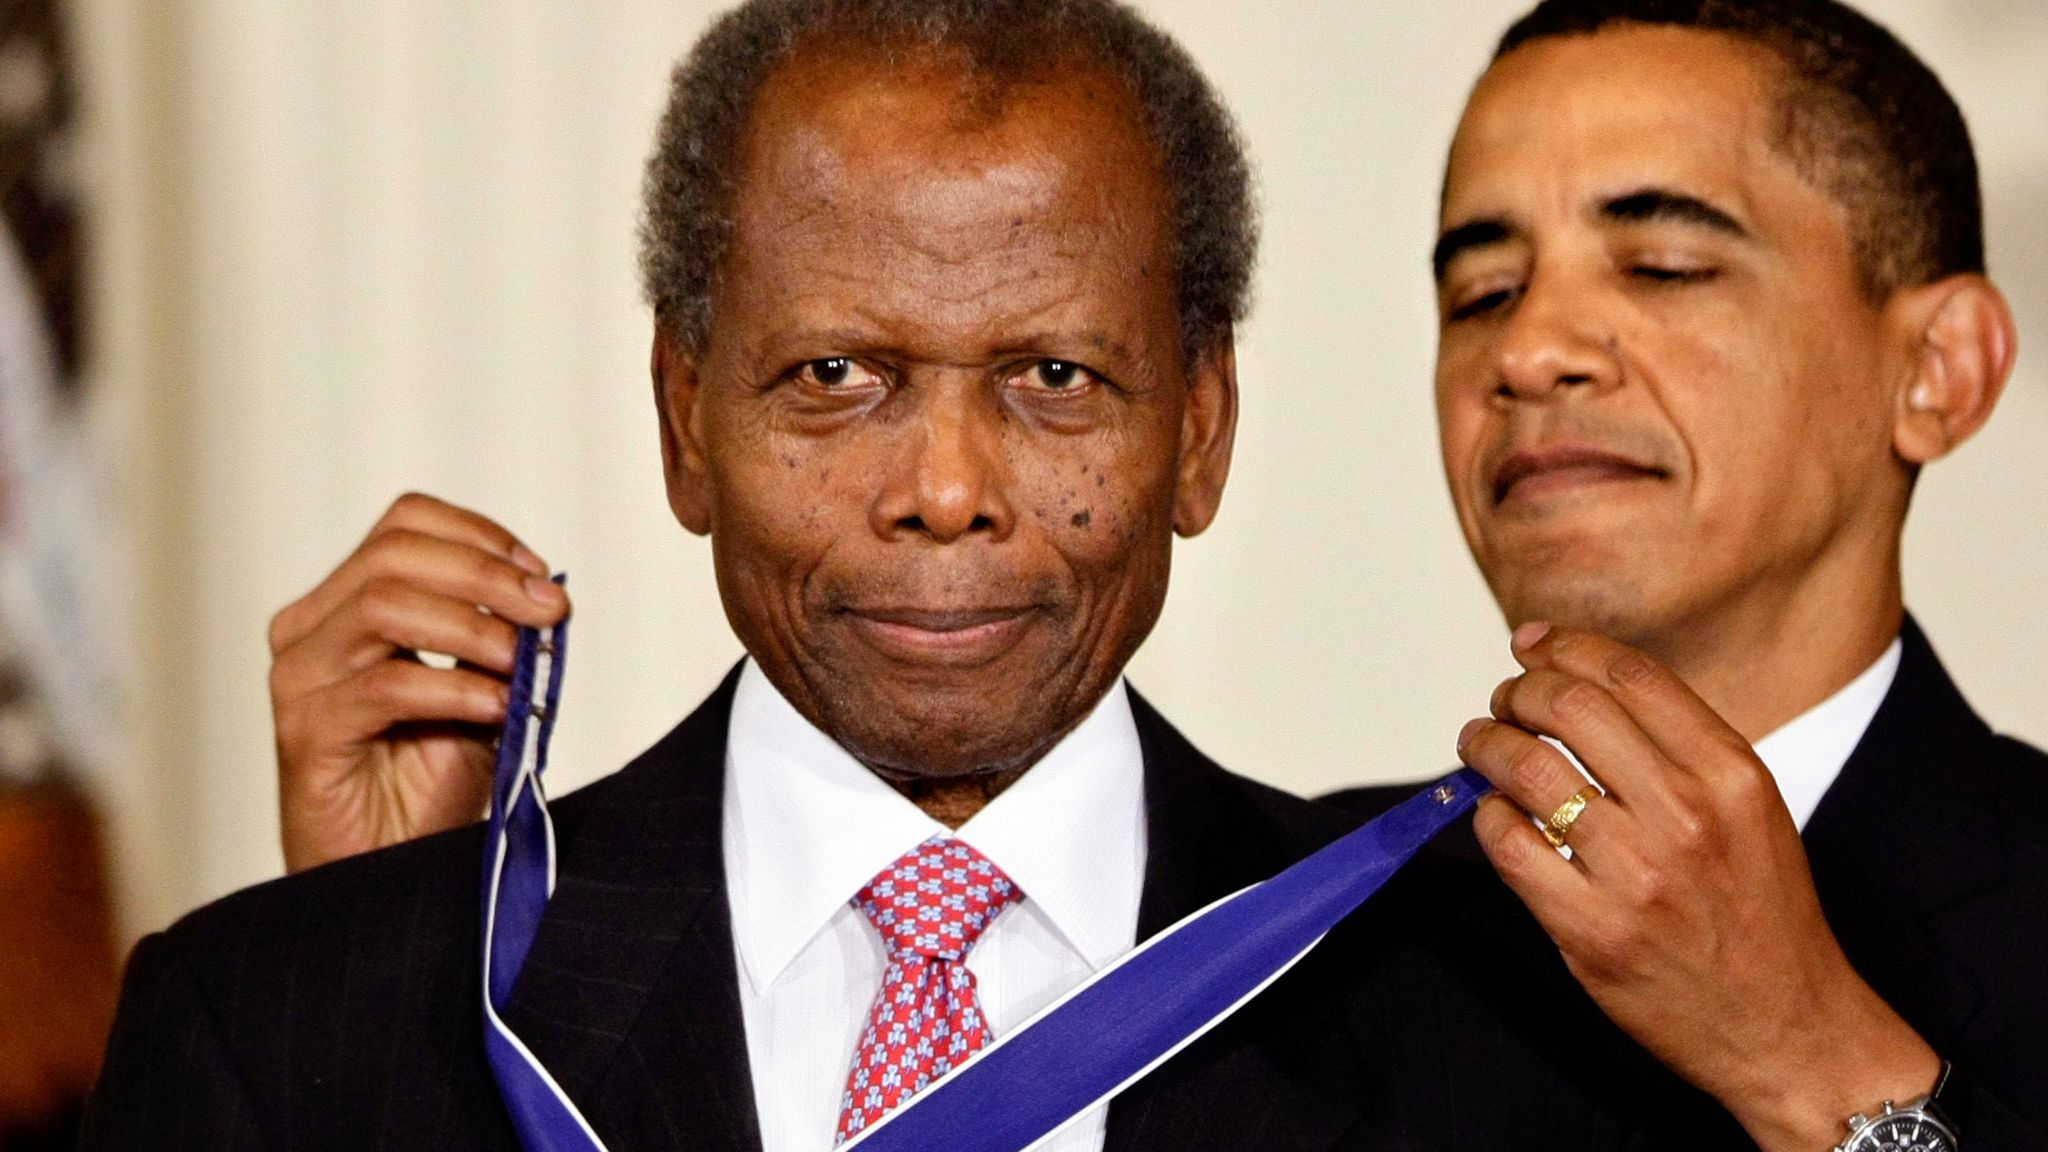 Pic: AP President Barack Obama presents the 2009 Presidential Medal of Freedom to Sidney Poitier during ceremonies in the East Room at the White House in Washington, Wednesday, Aug. 12, 2009. (AP Photo/J. Scott Applewhite)